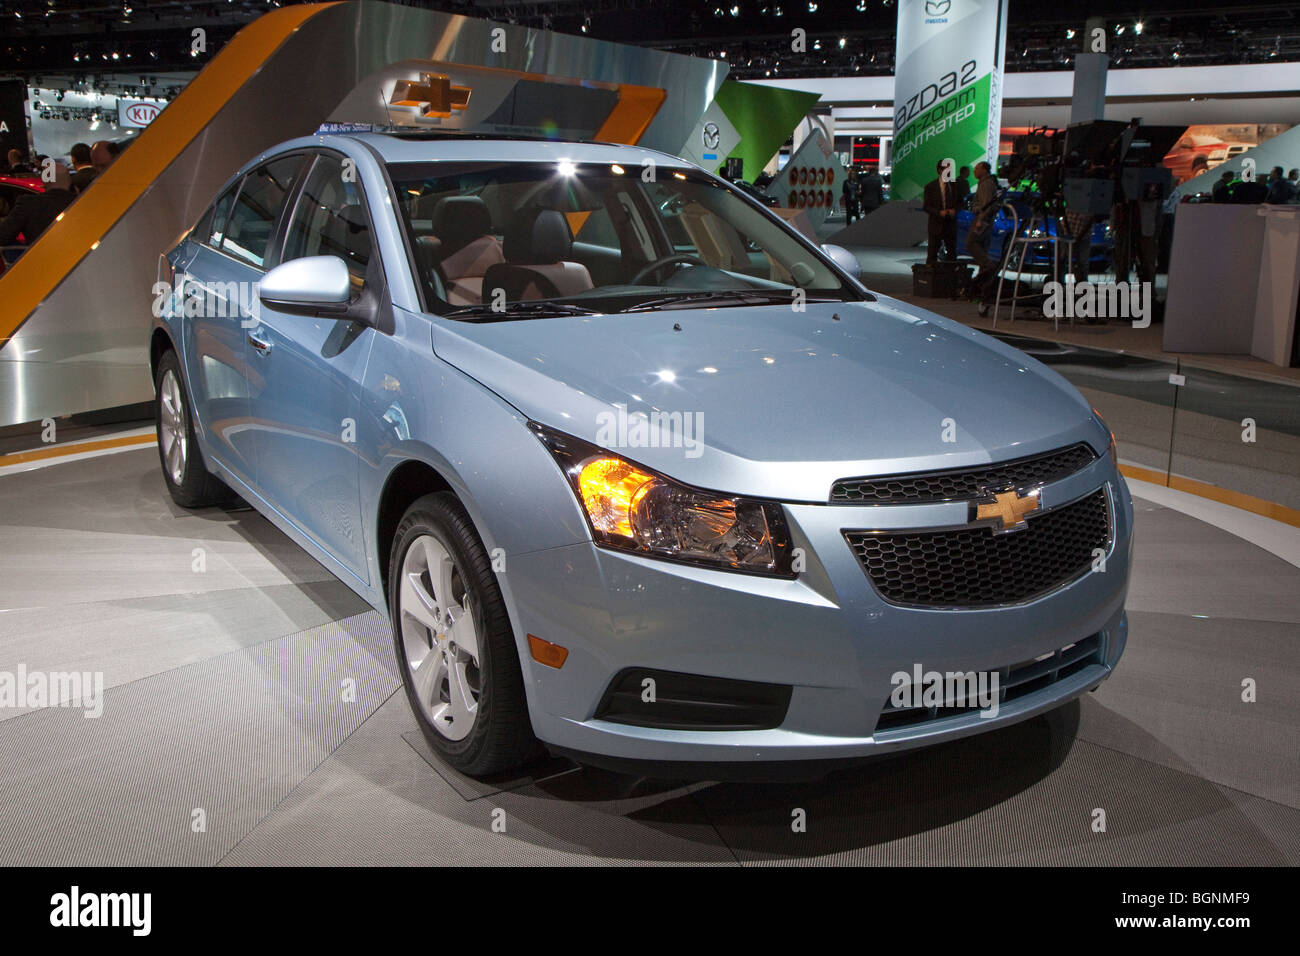 Detroit, Michigan - The 2011 Chevrolet Cruze on display at the 2010 North American International Auto Show. Stock Photo